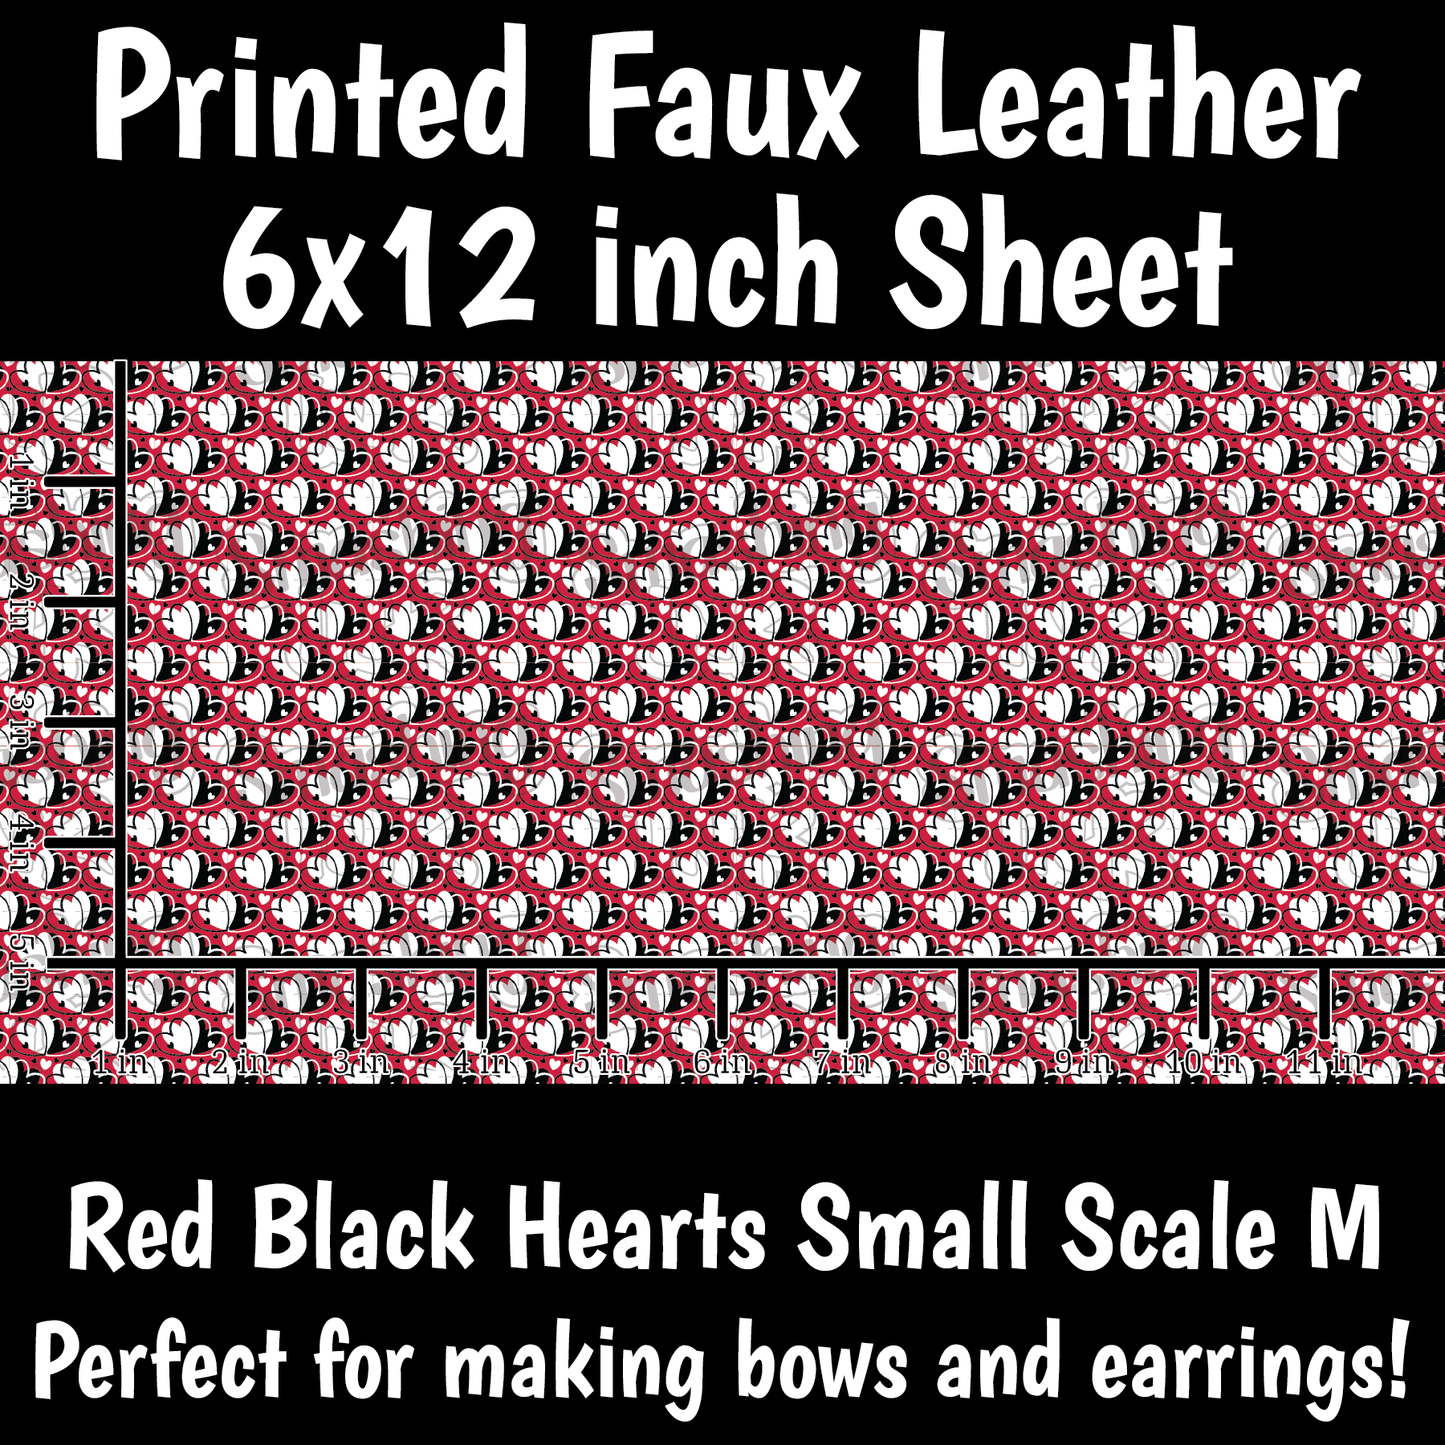 Red Black Hearts Small Scale M - Faux Leather Sheet (SHIPS IN 3 BUS DAYS)